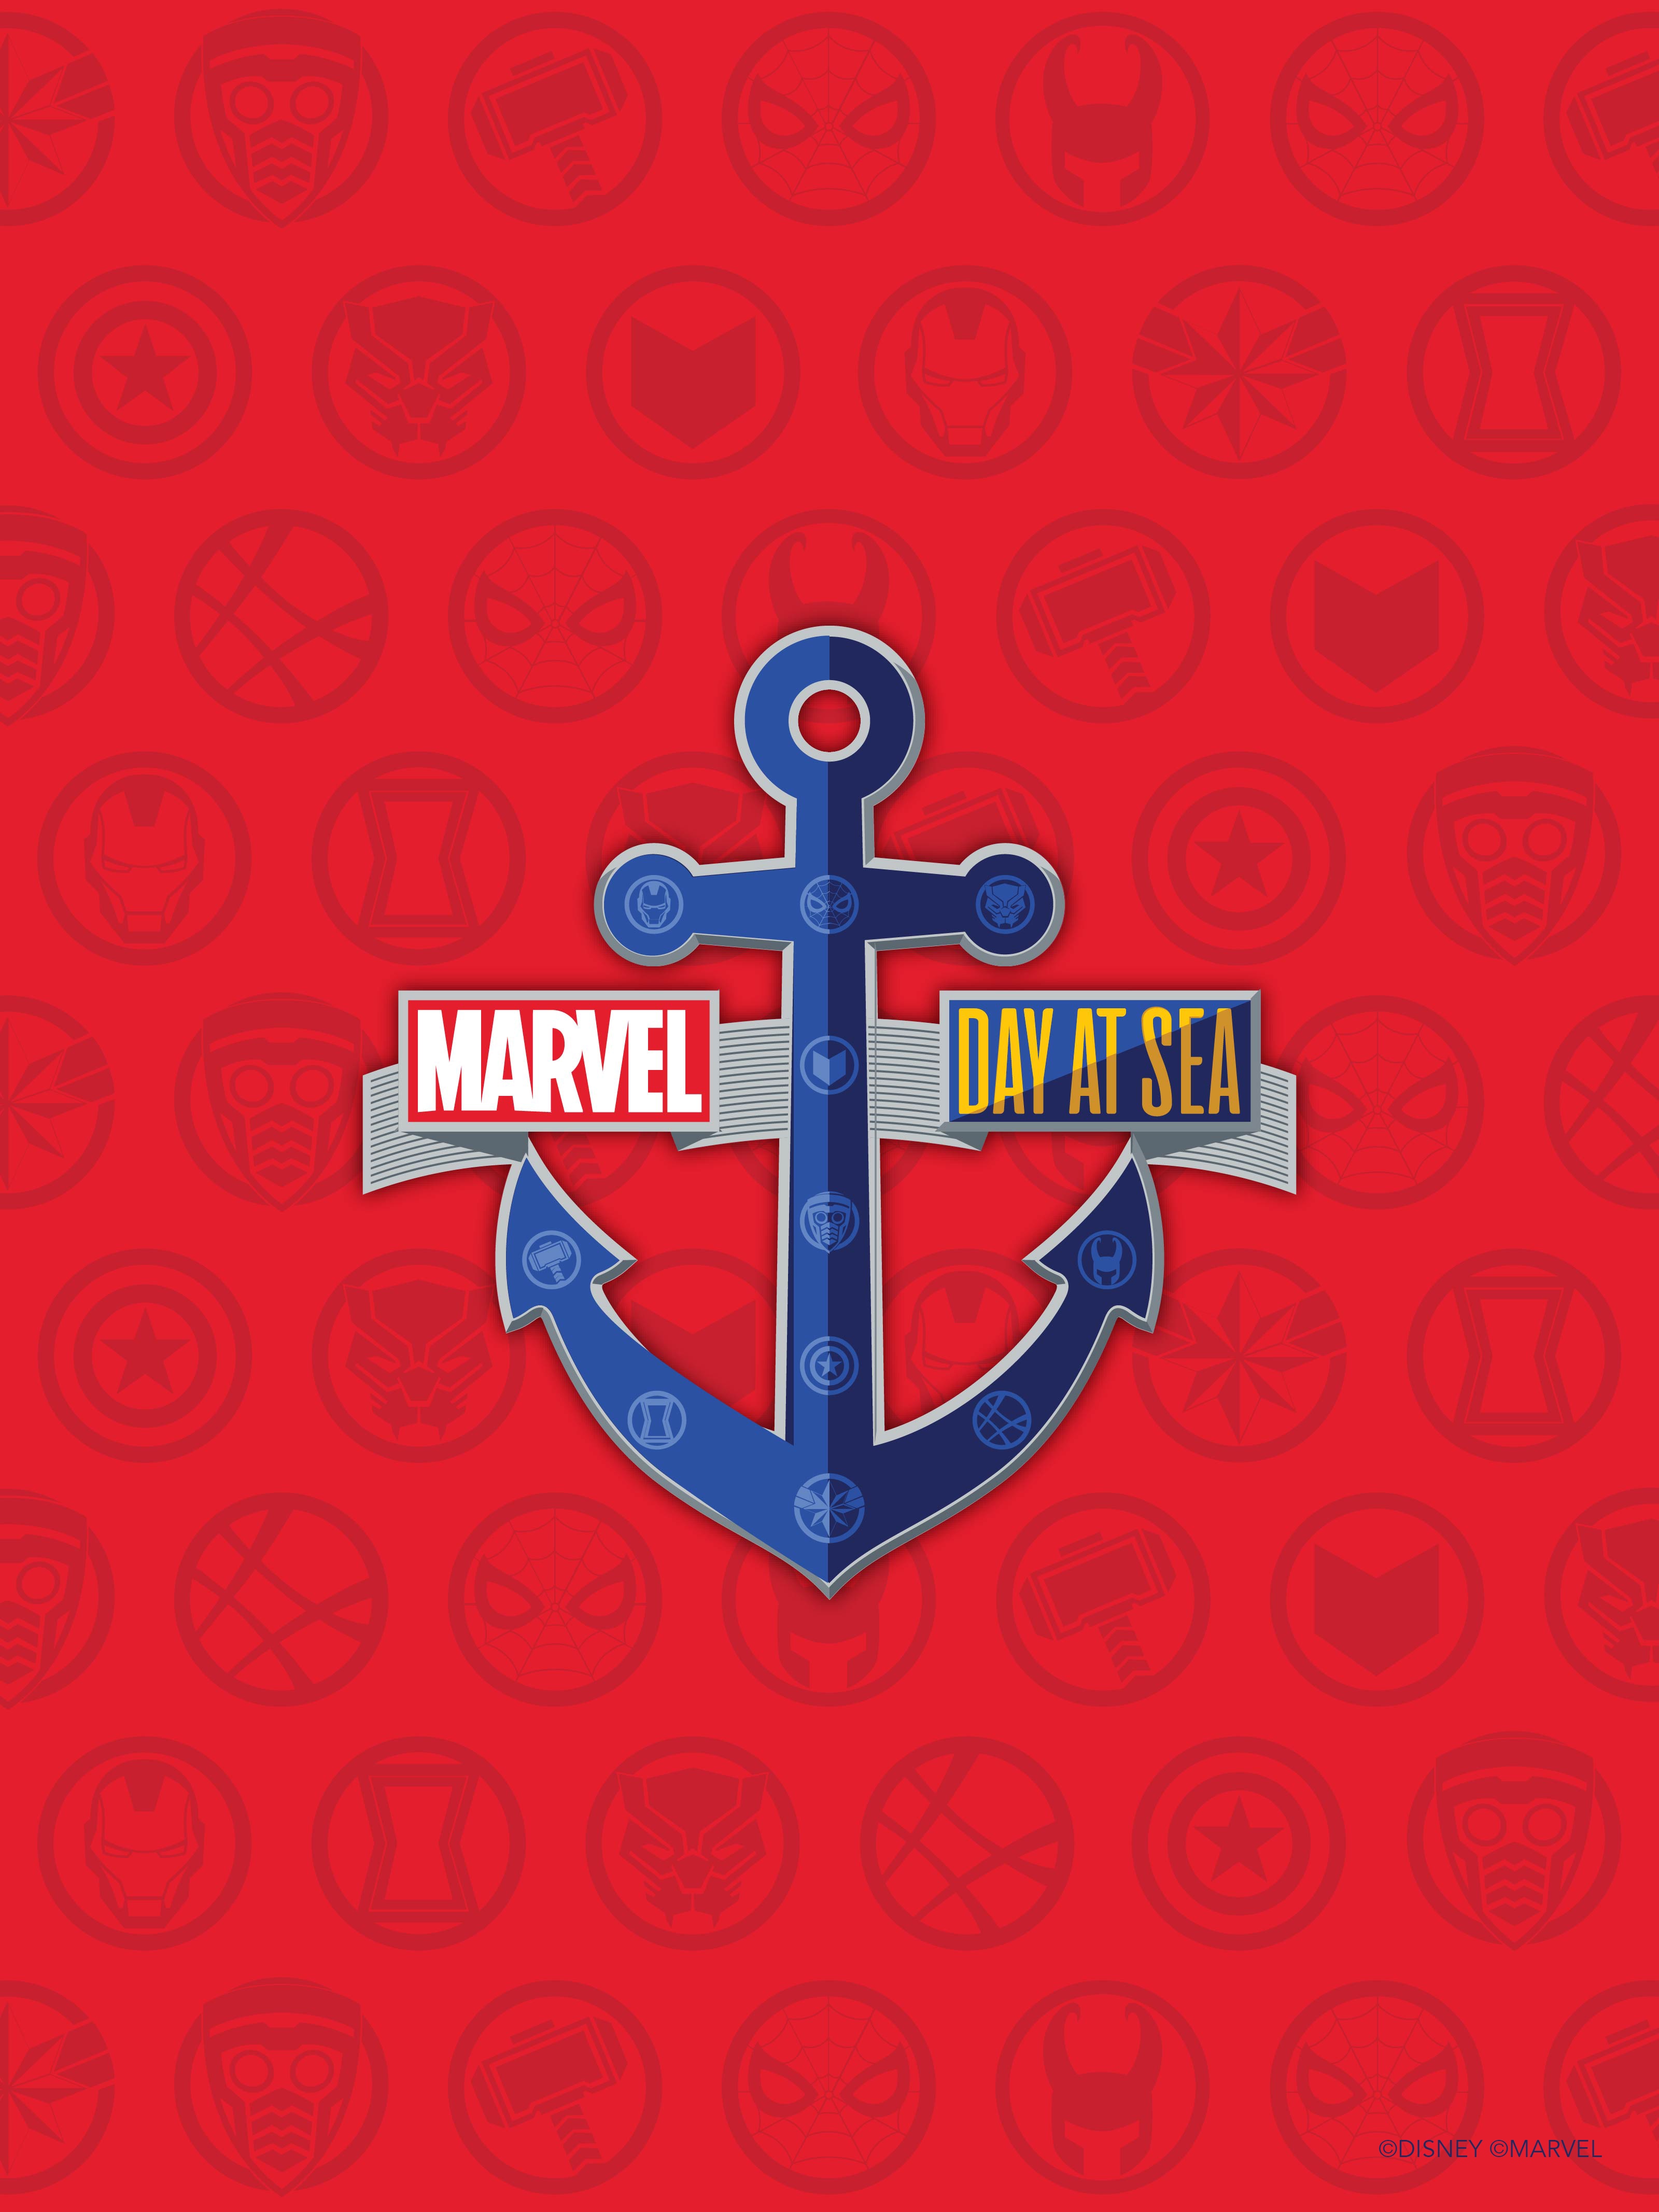 Marvel Day At Sea Digital Wallpapers The Disney Cruise Line Blog